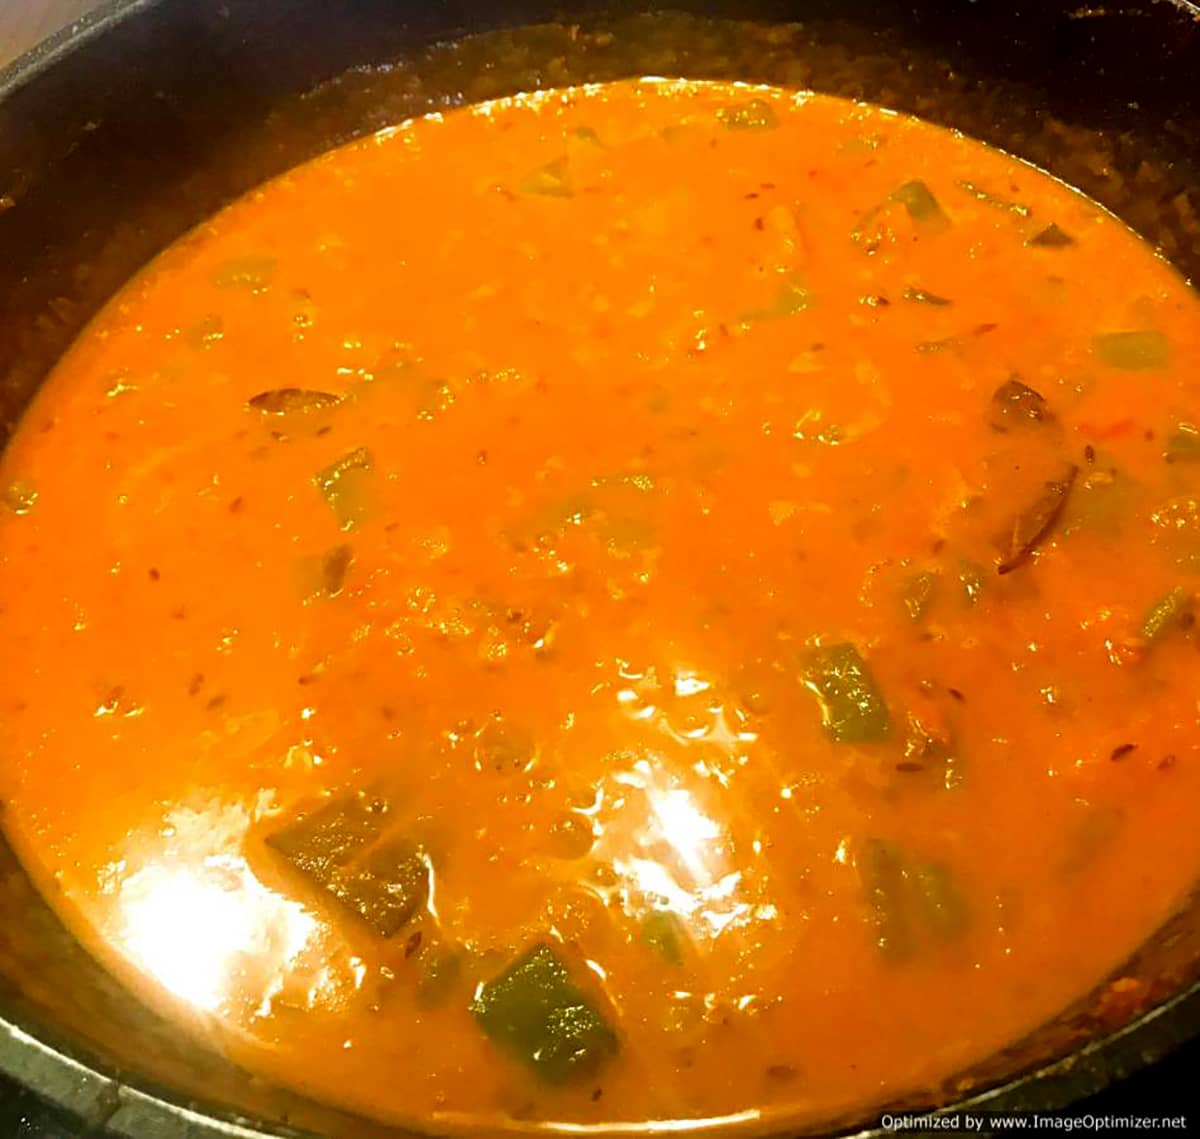 Add water to the pumpkin curry to make the sauce